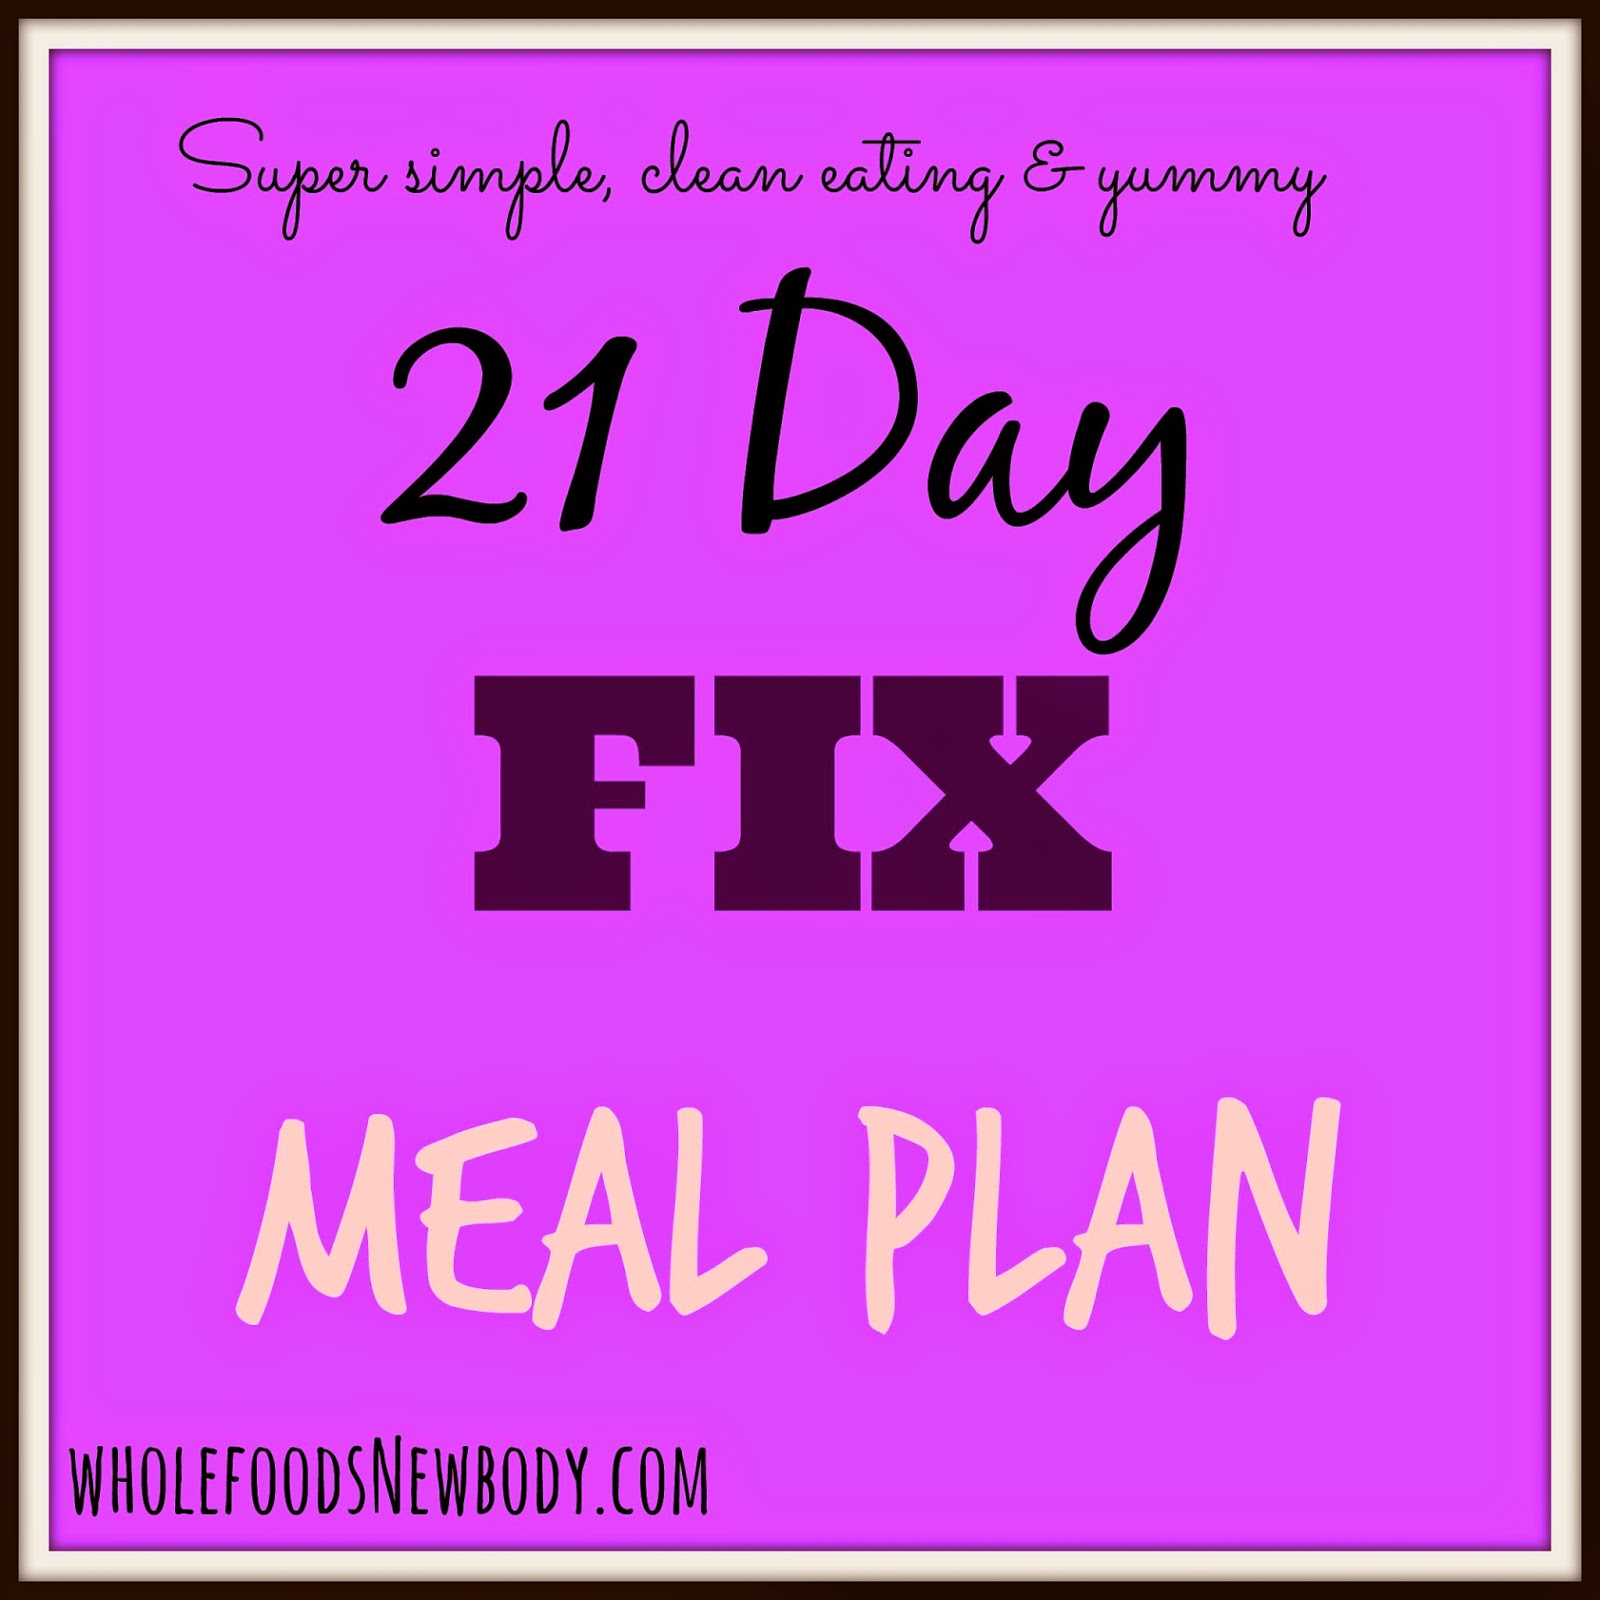 Whole Foods New Body: {Meal Planning Monday} 21 Day Fix 1/12/15